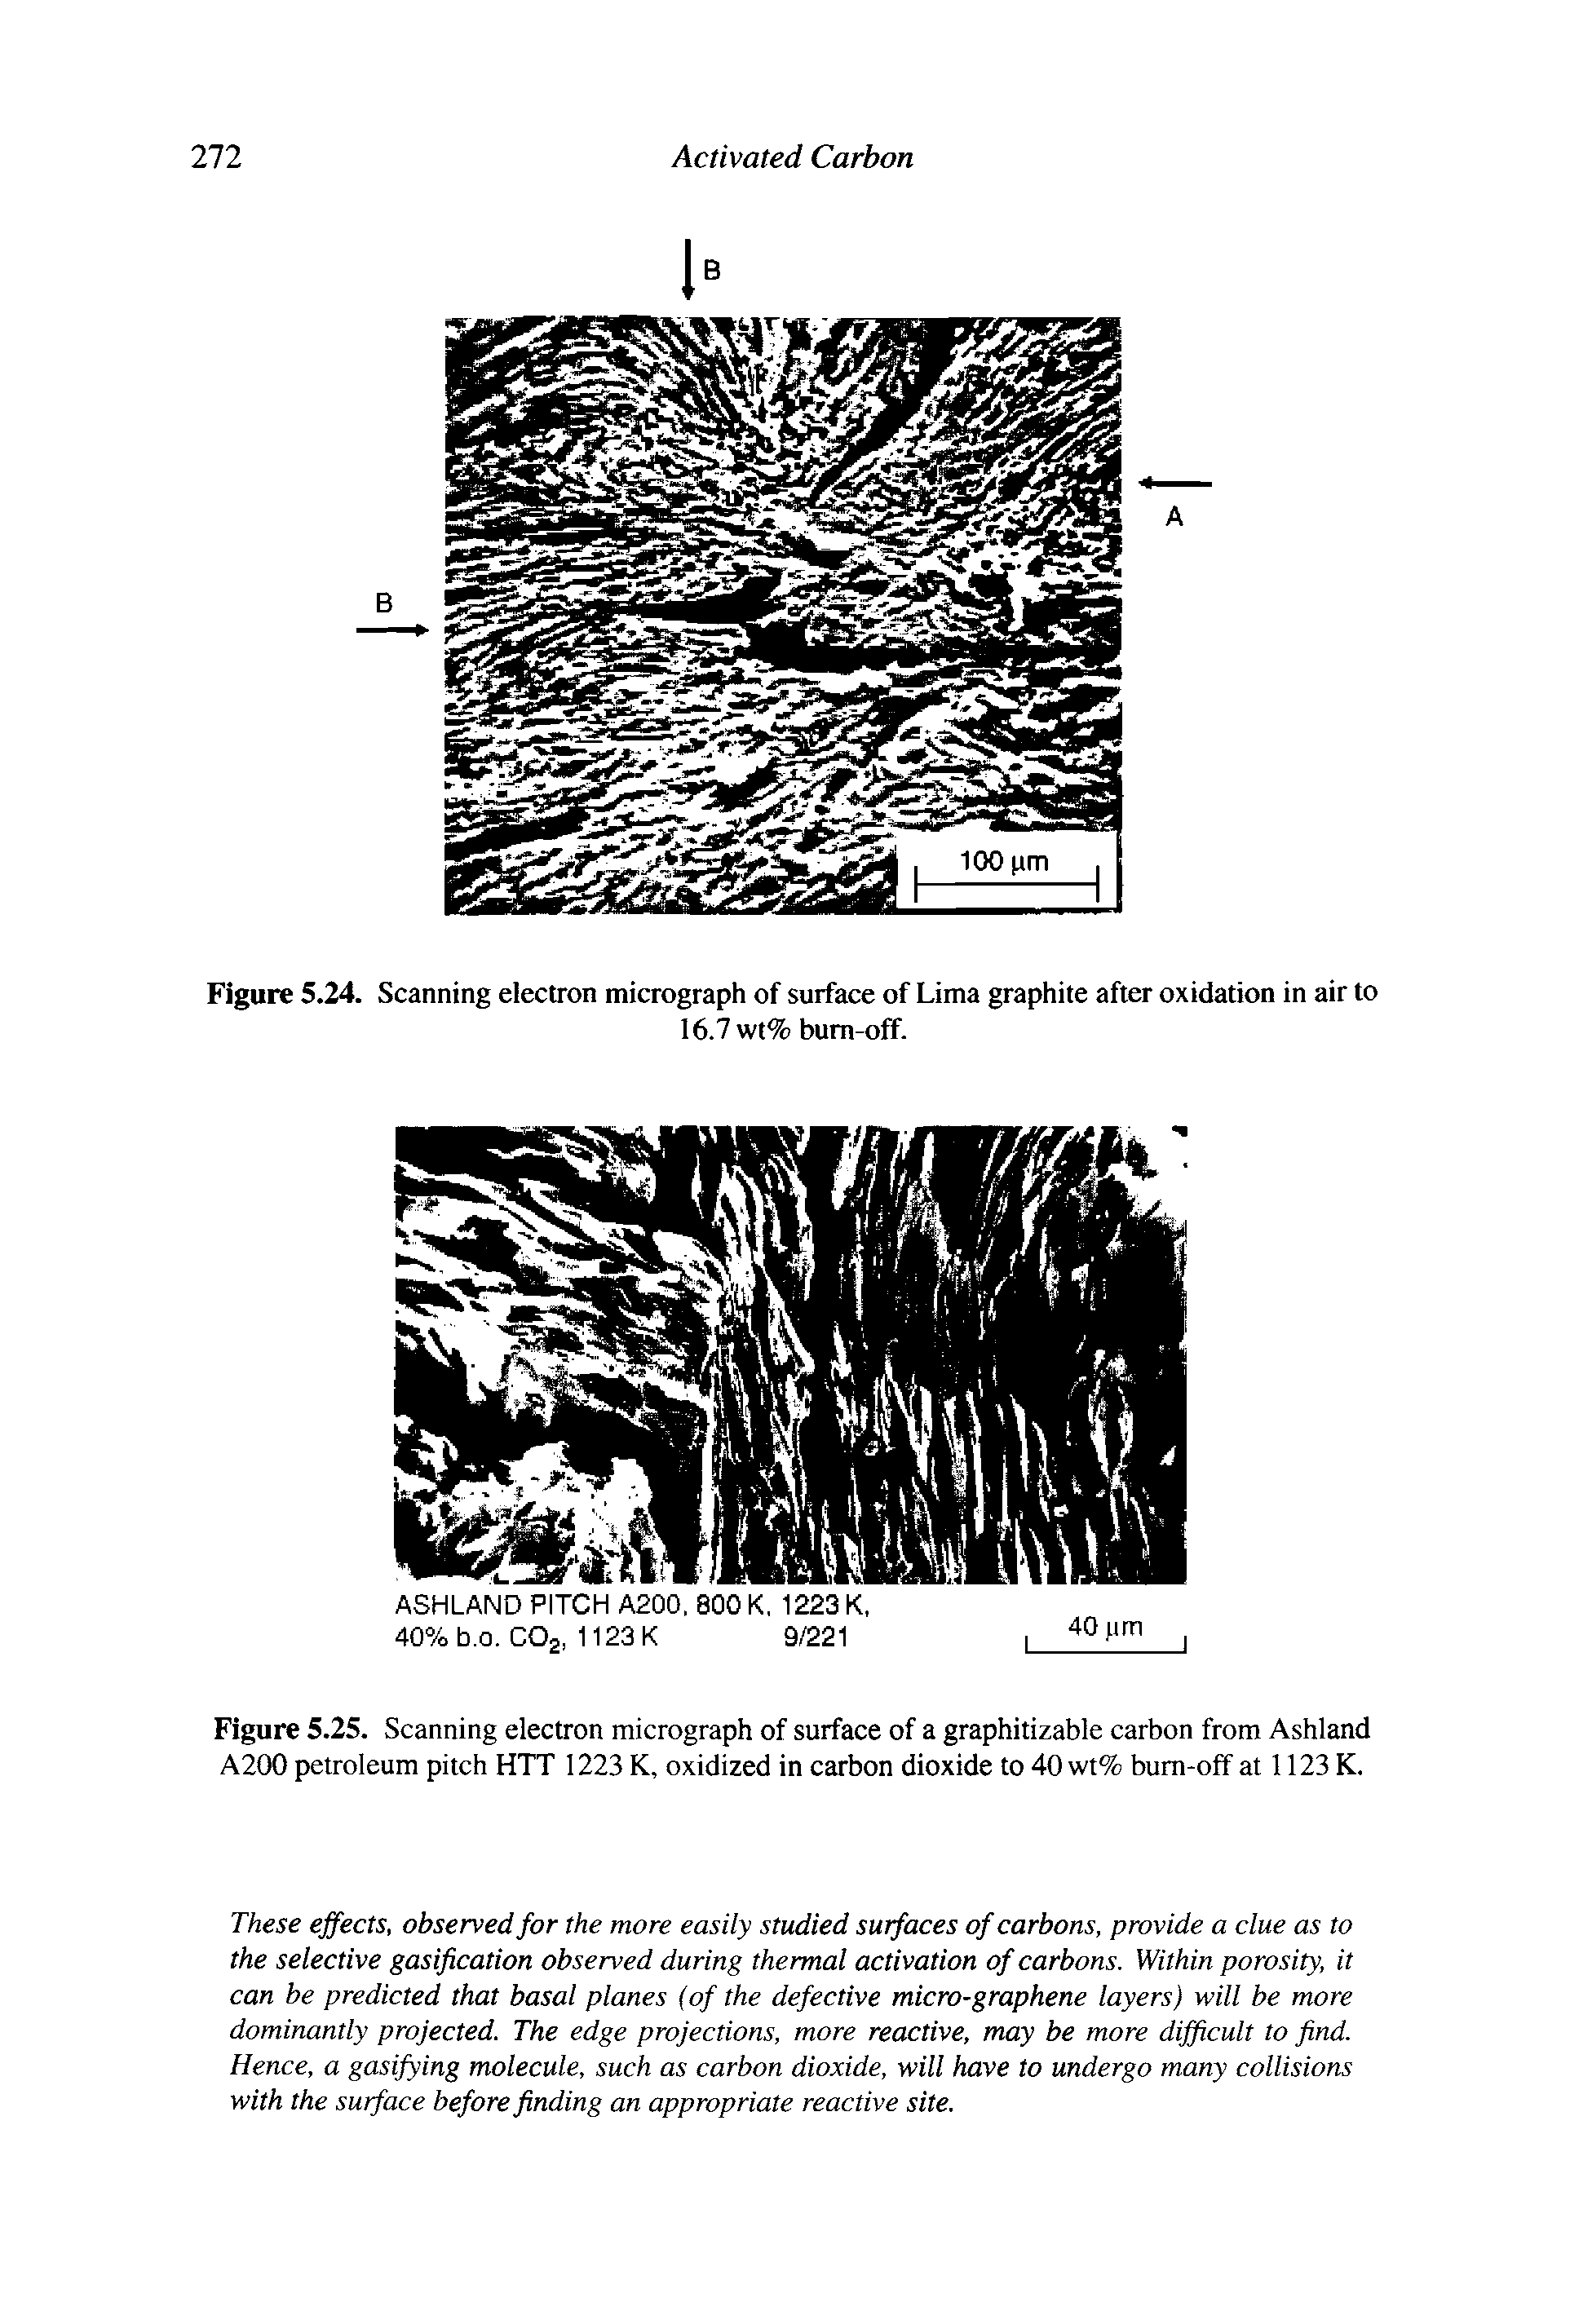 Figure 5.25. Scanning electron micrograph of surface of a graphitizable carbon from Ashland A200 petroleum pitch HTT 1223 K, oxidized in carbon dioxide to 40 wt% bum-off at 1123 K.